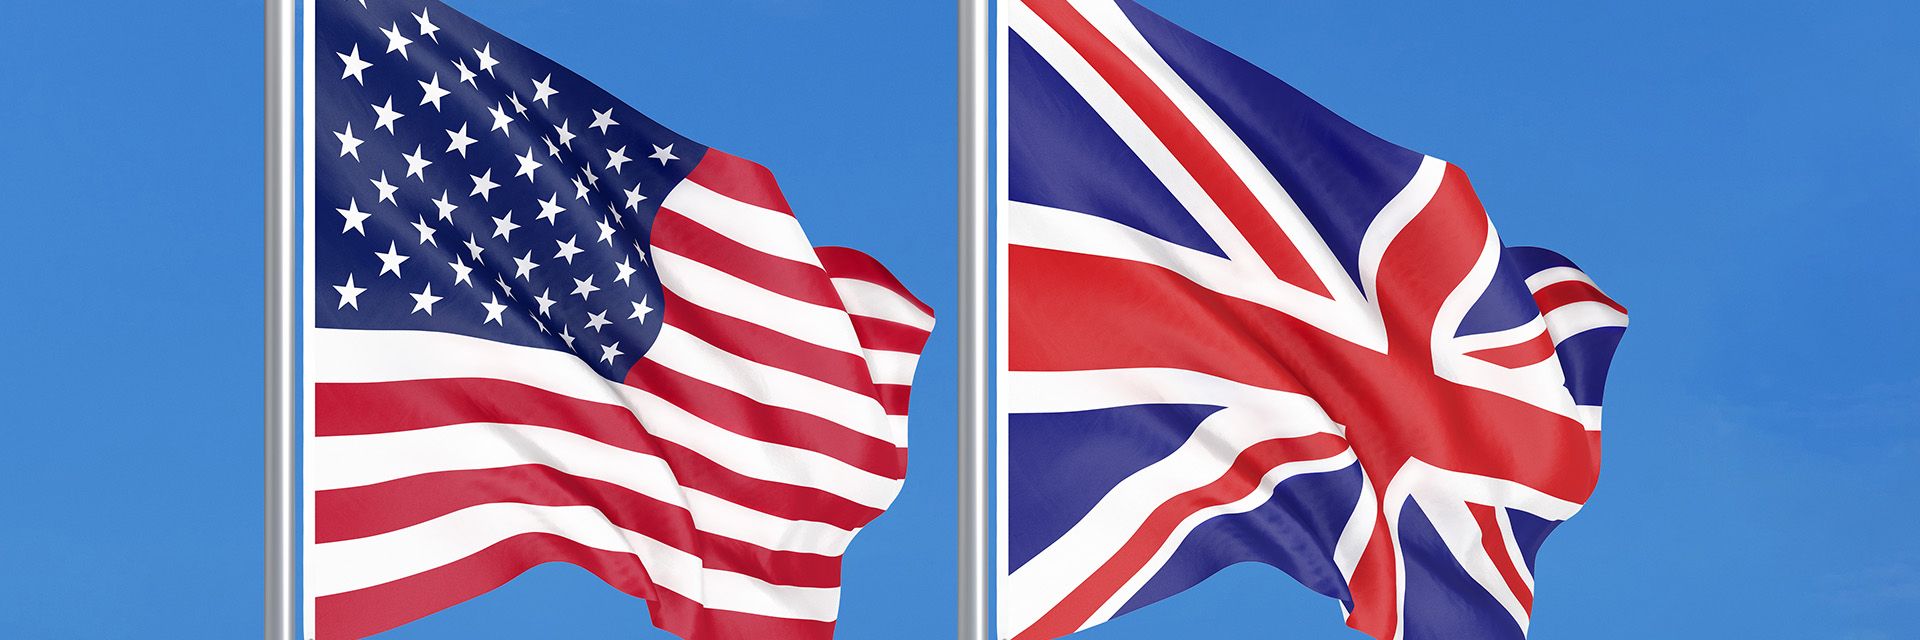 The USA and UK flags. A mutually beneficial FTA will provide a desirable outcome for both countries
